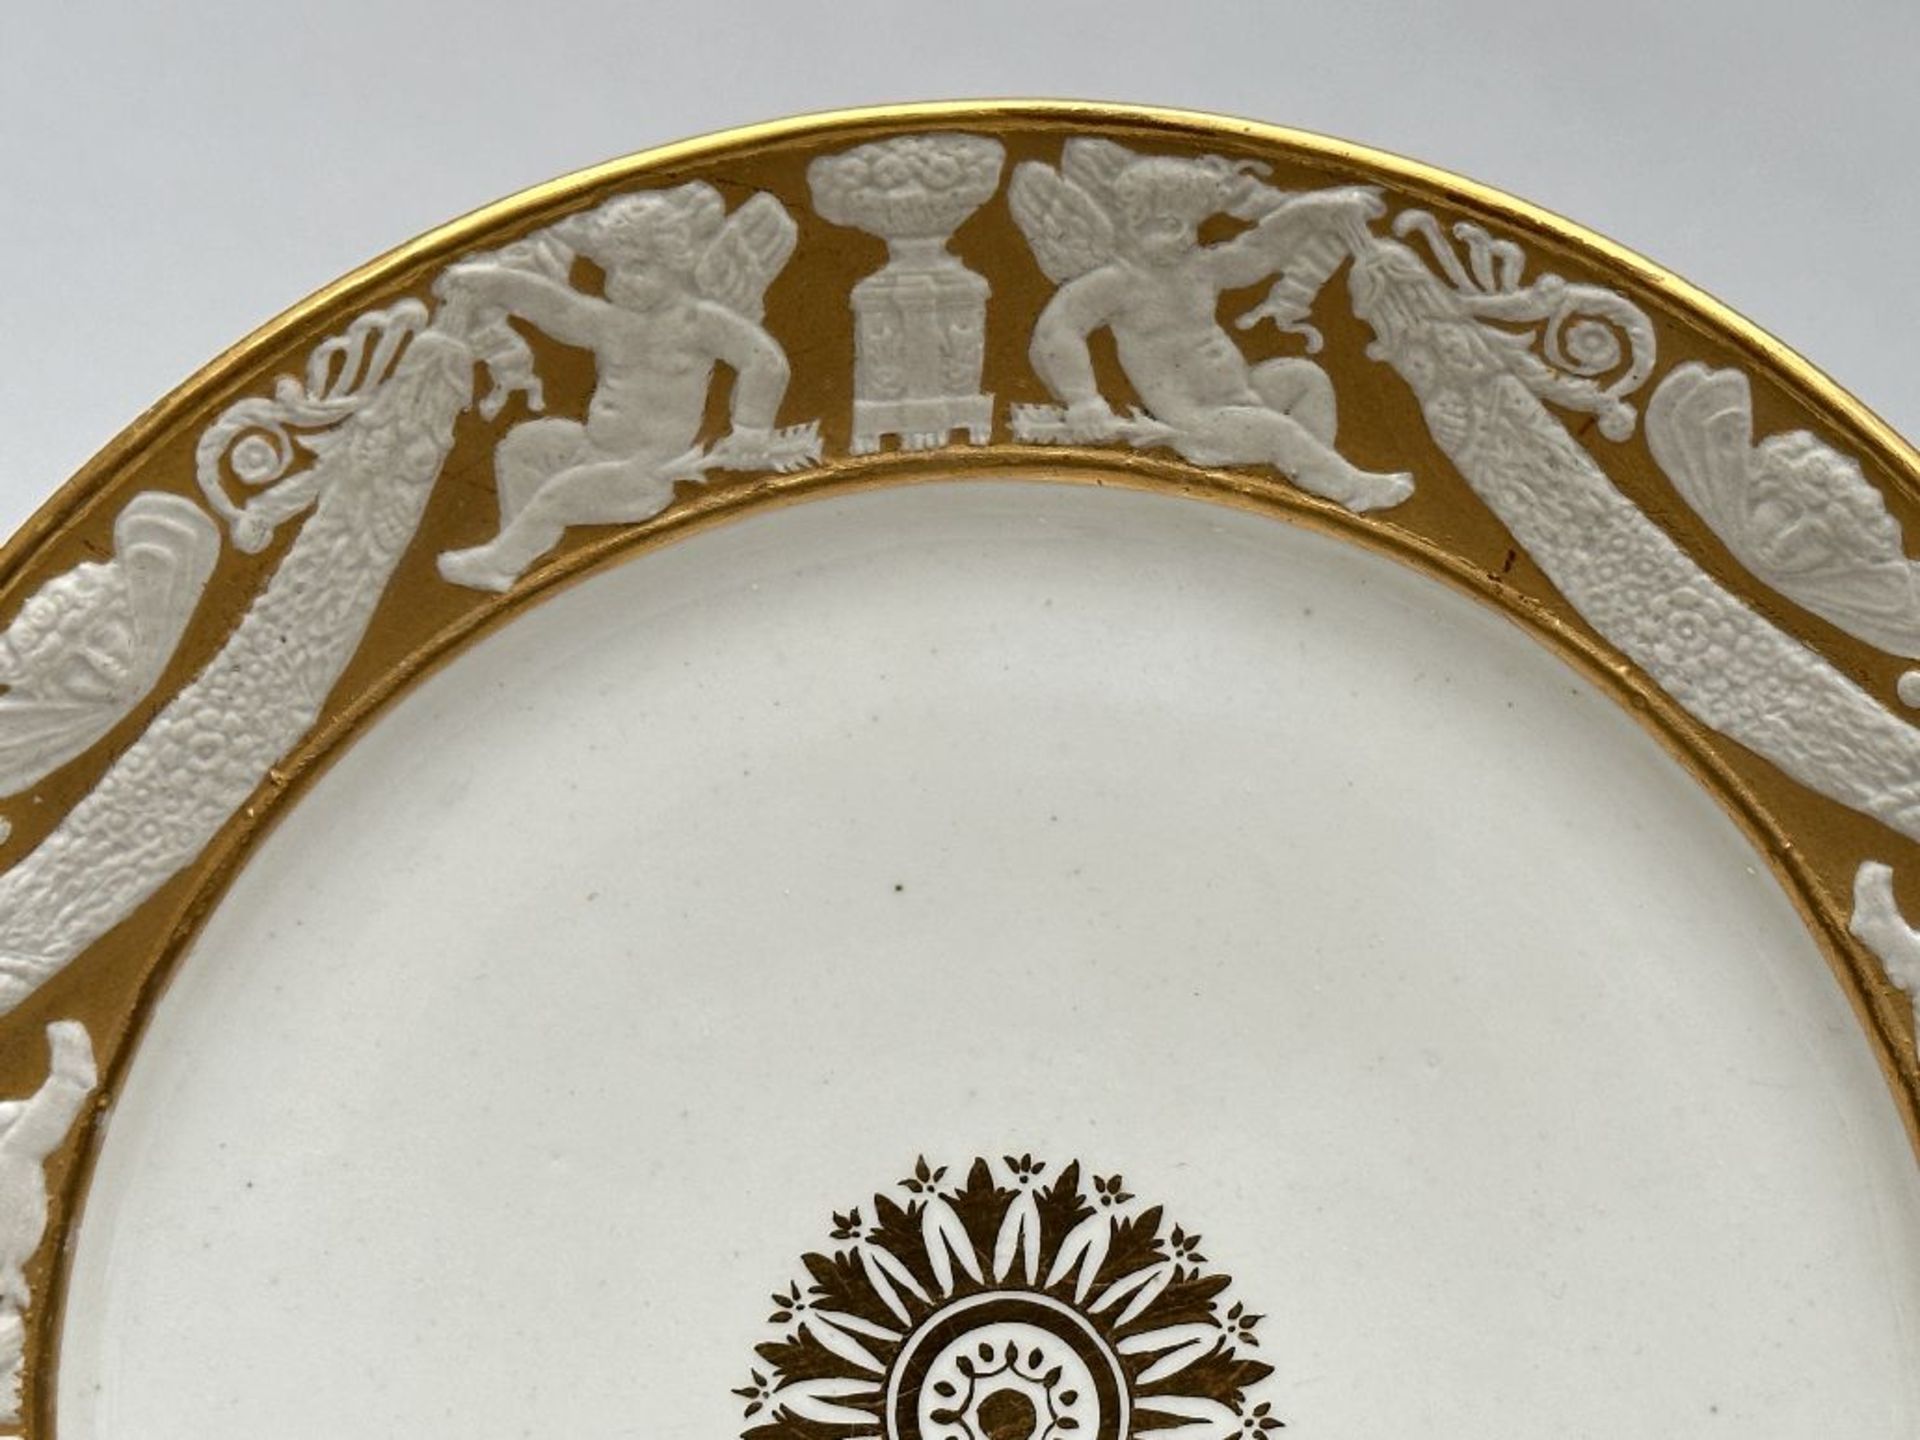 Lot: charger 'dog chariot' by Dihl Paris and a pair of Sèvres dishes with relief decoration - Image 3 of 6